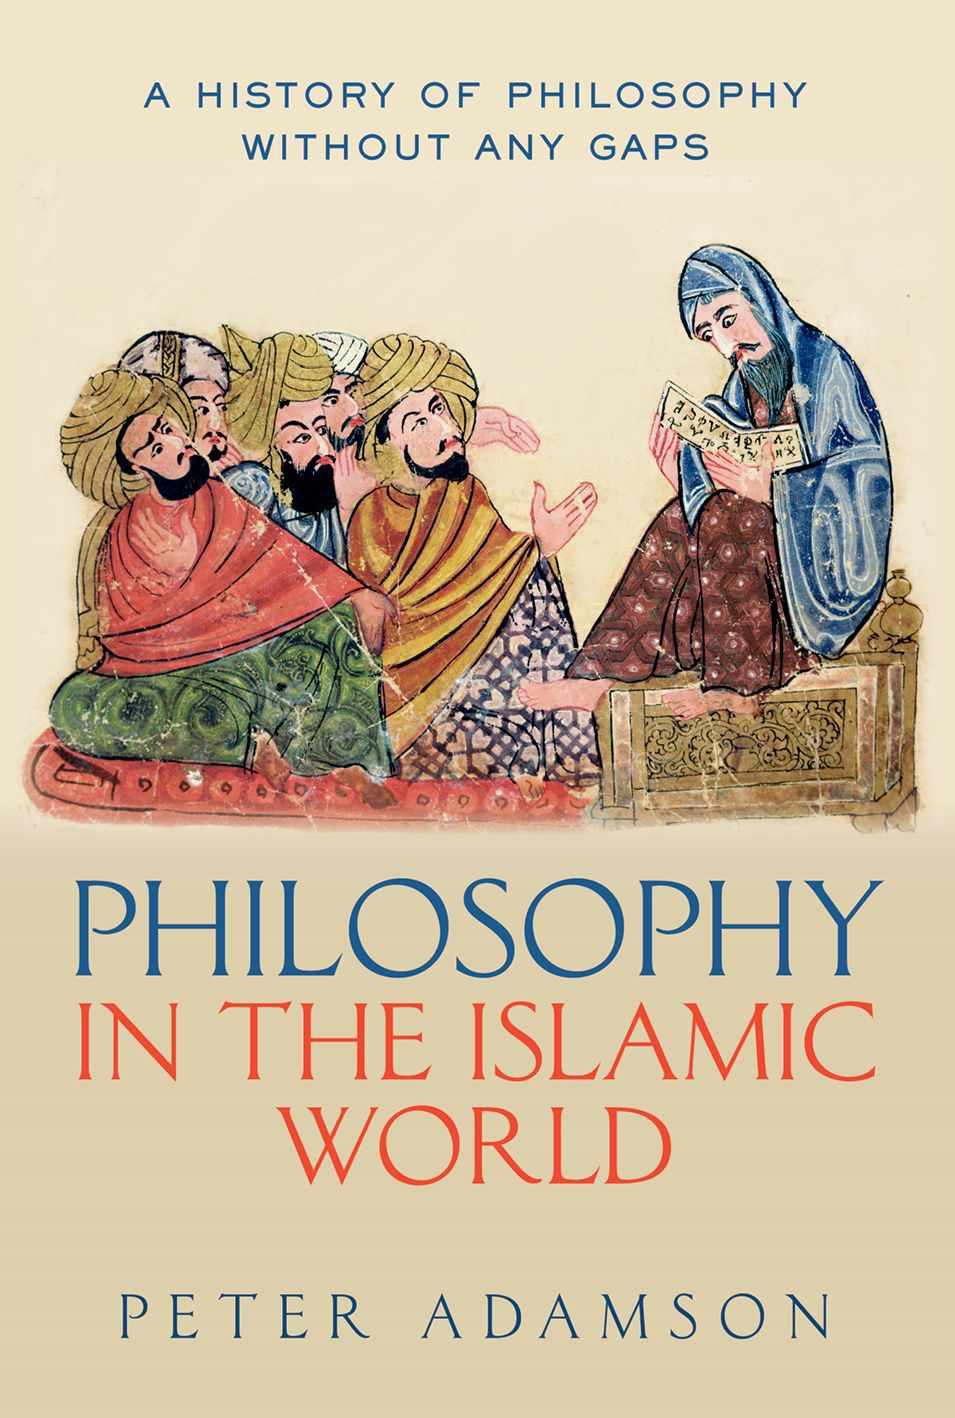 Philosophy in the Islamic World: A History of Philosophy without Any Gaps